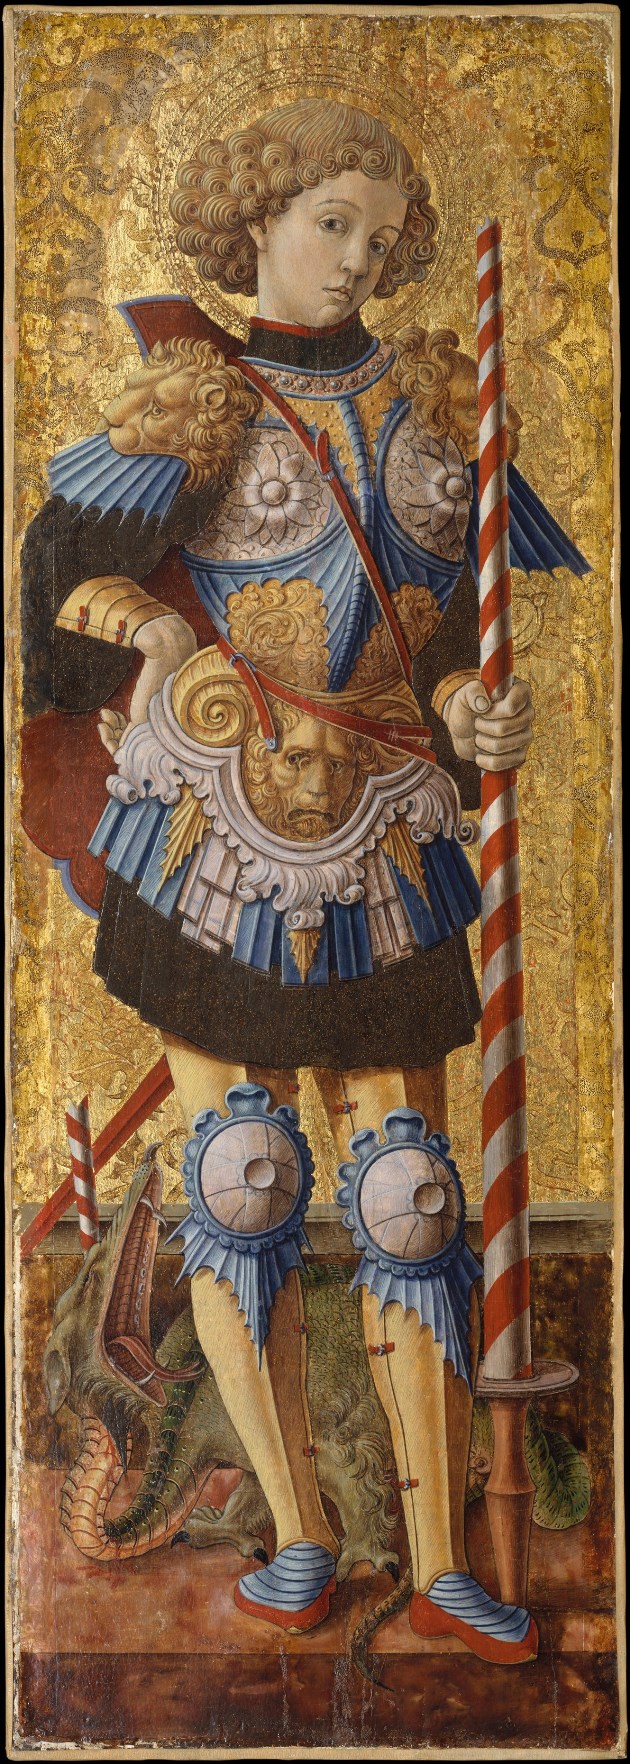 Painting of Saint George, by Carlo Crivelli